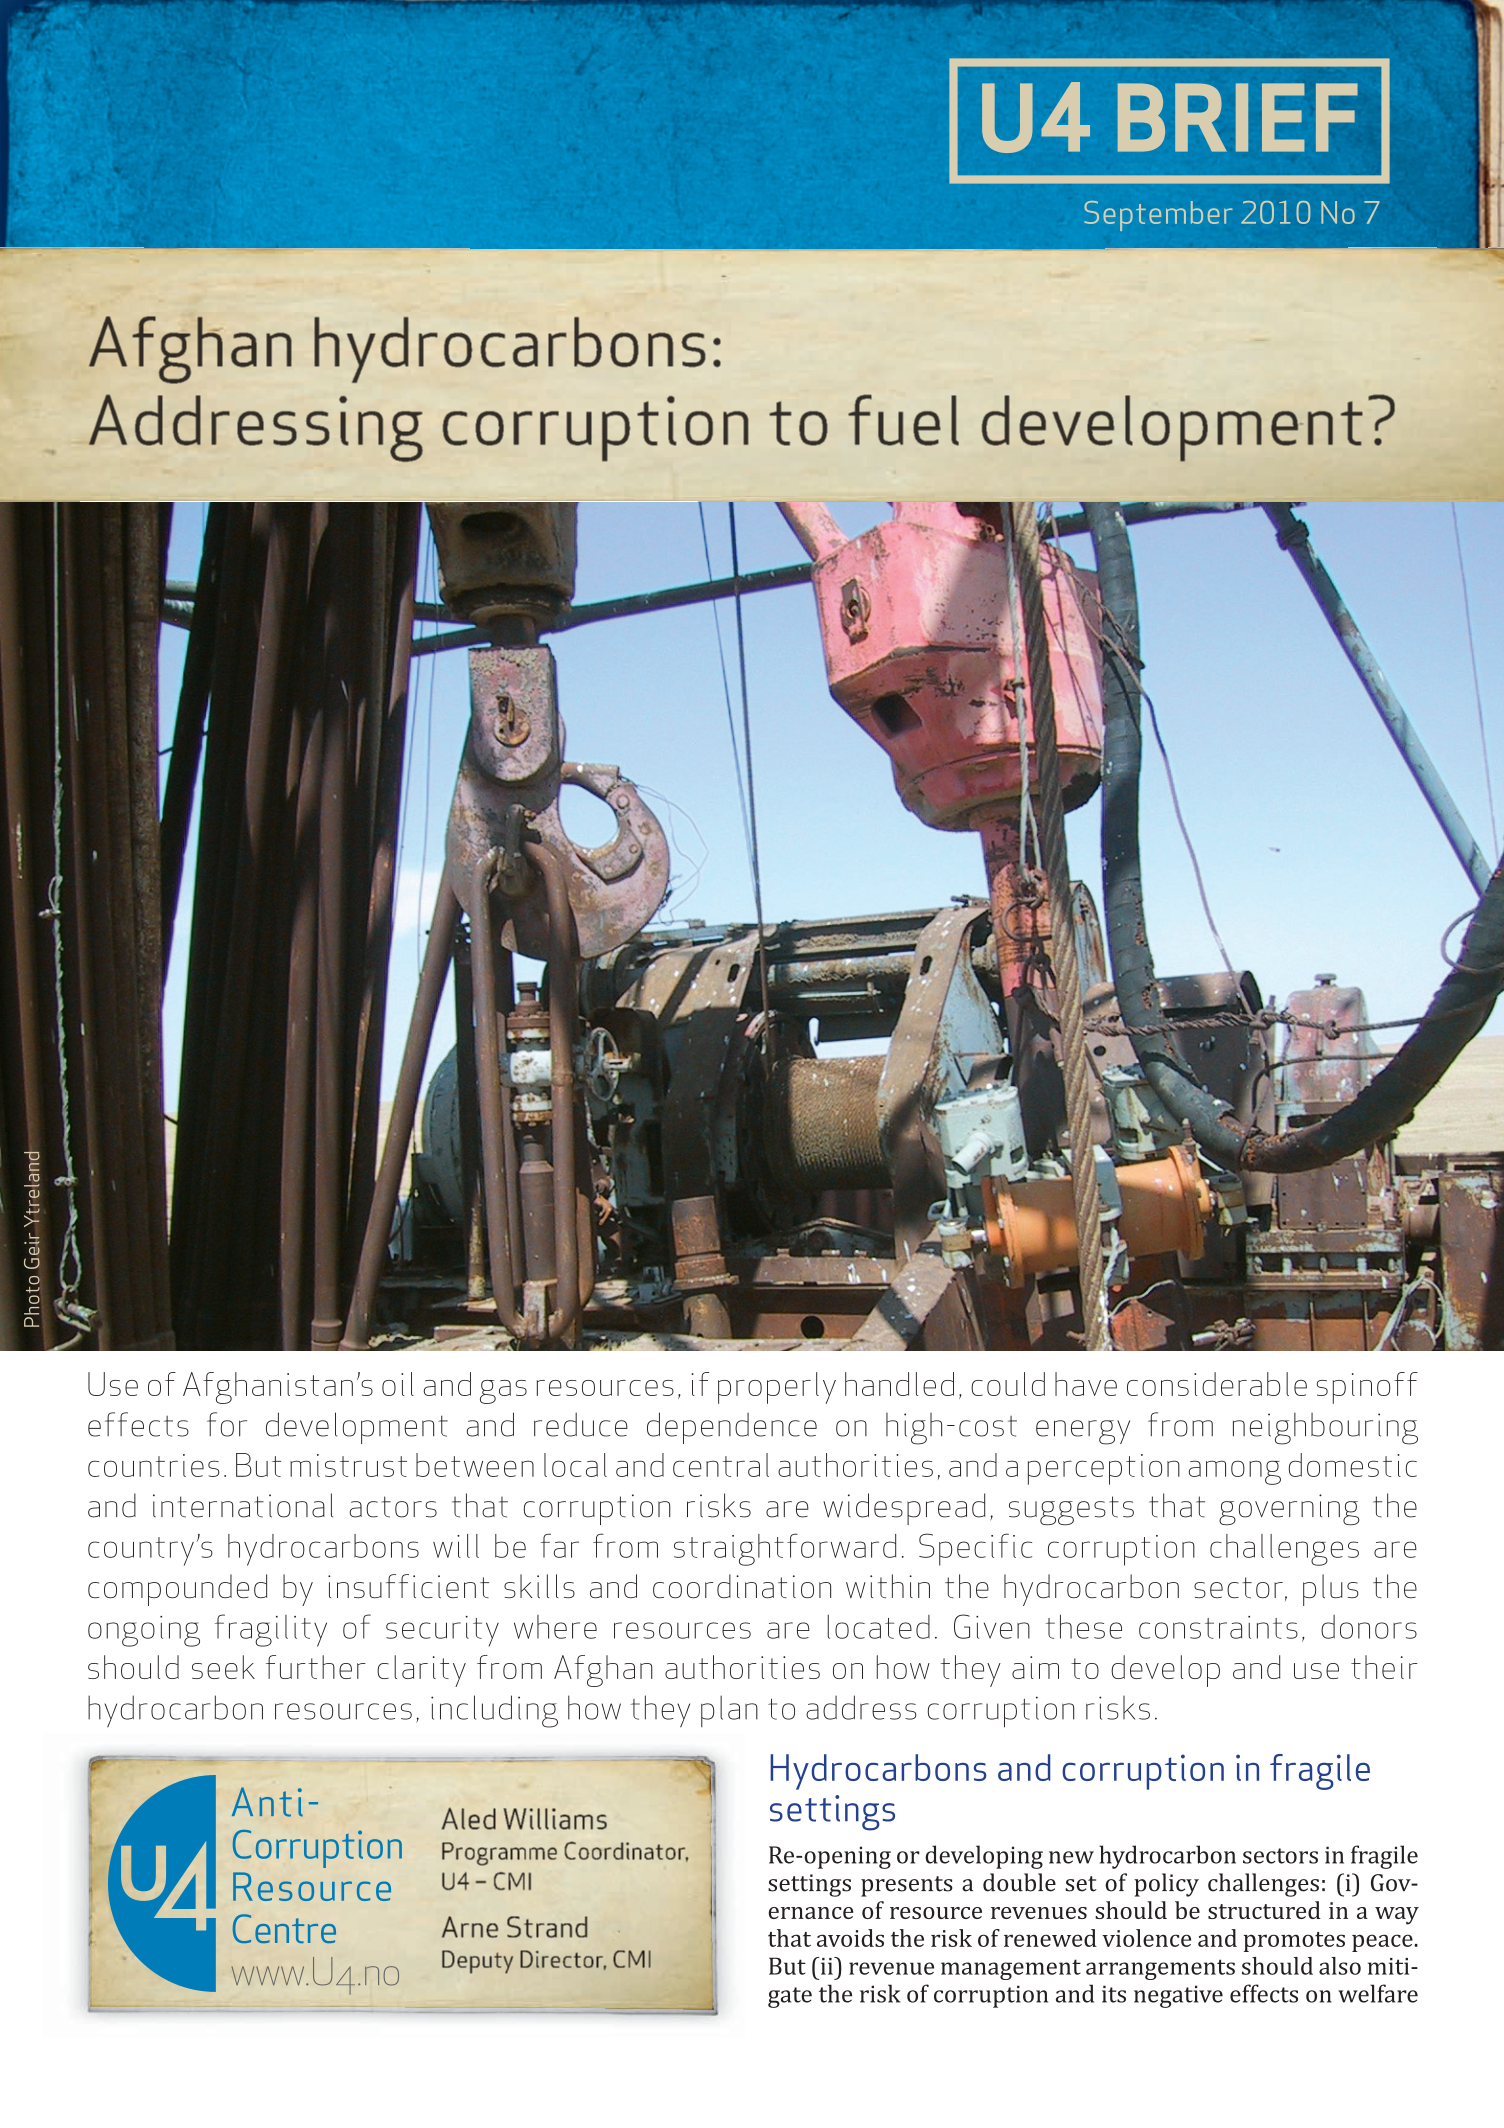 Afghan hydrocarbons: Addressing corruption to fuel development?